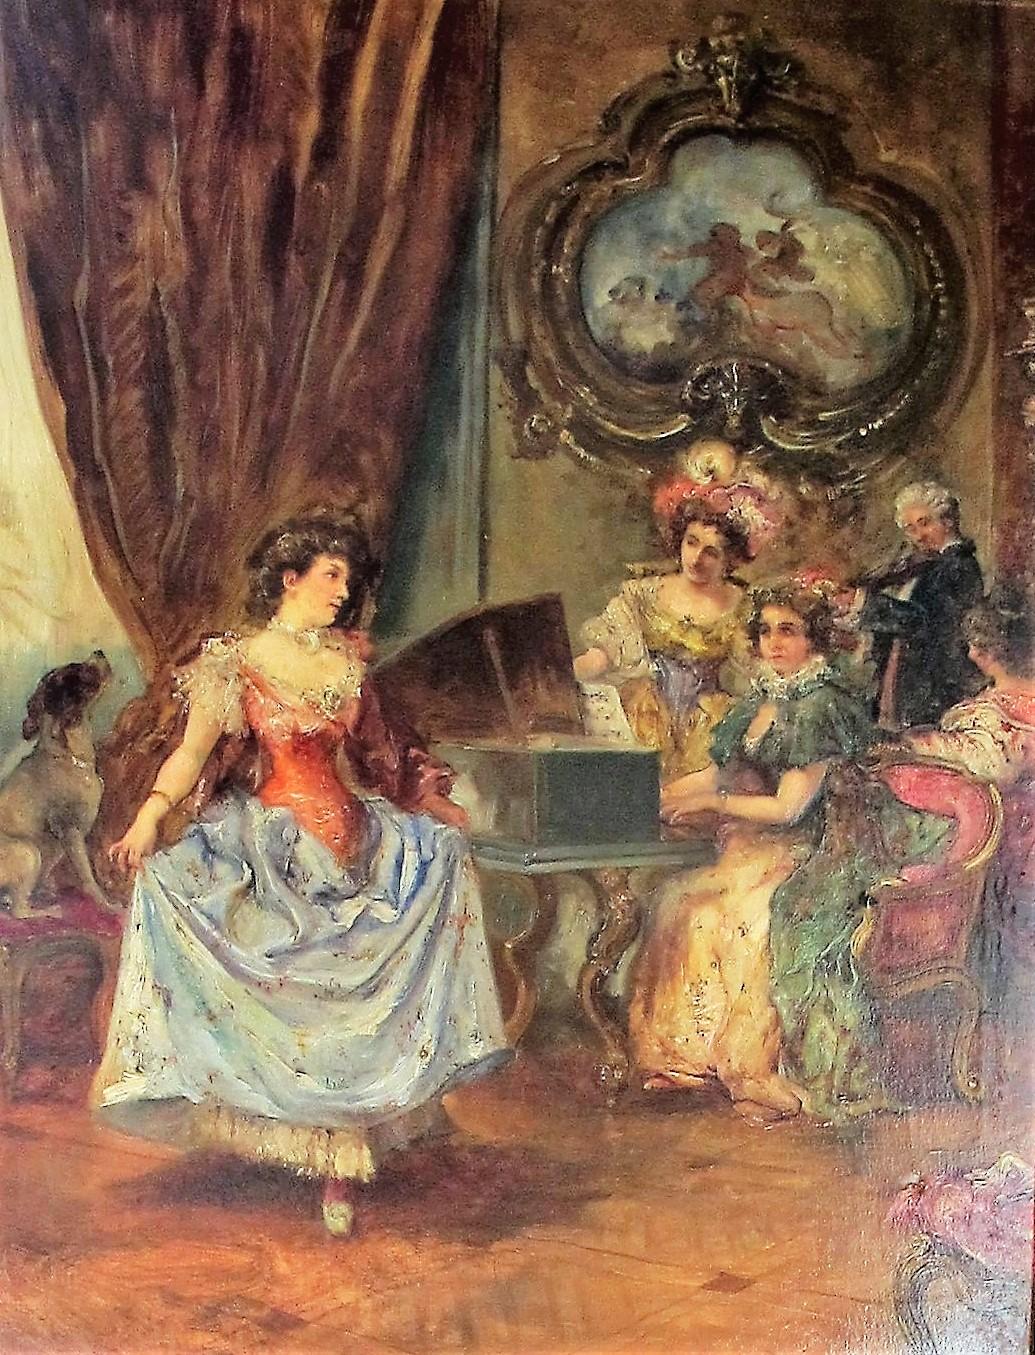 Oil on canvas representing a music scene in a living room with several characters. The sensuality of the painting is reinforced by the representation, in the foreground, of a young woman dancing. The music symbolizes the passing moment and